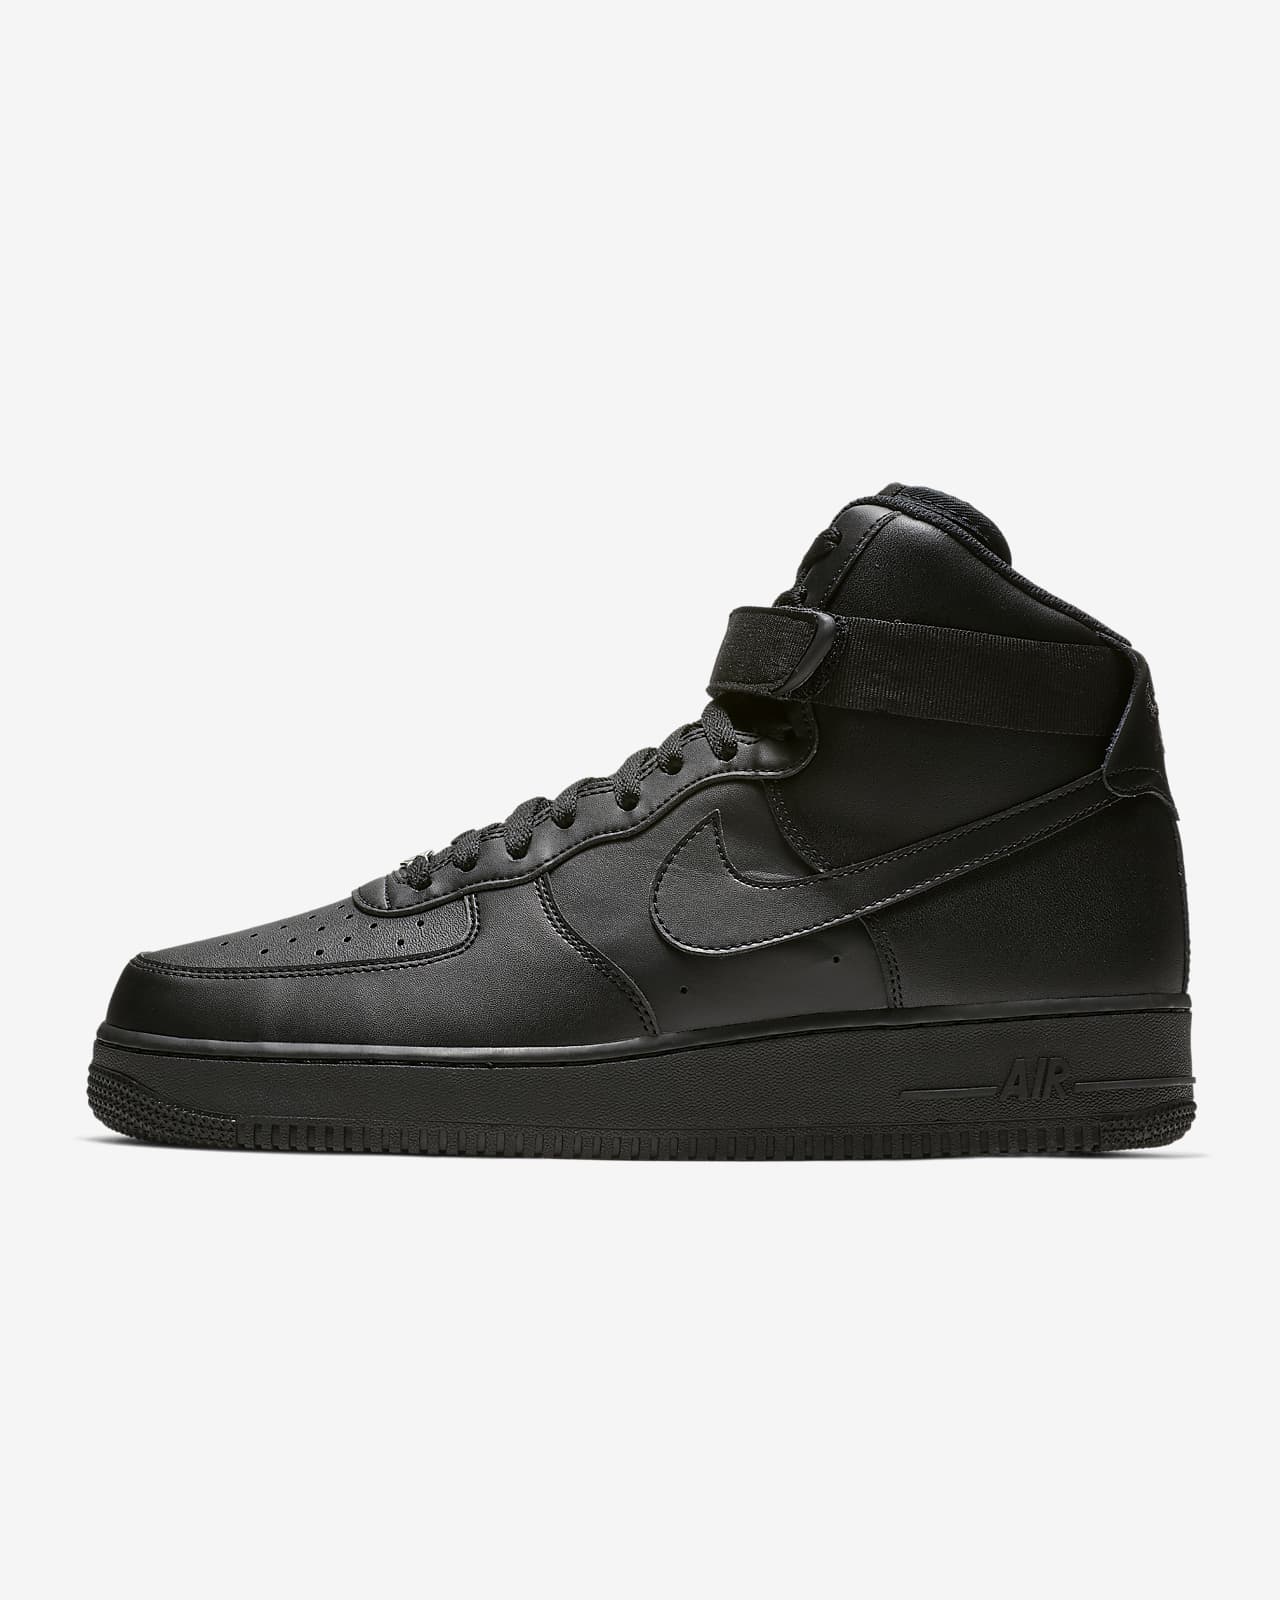 Nike Air Force 1 High 07 Mens Shoes Review